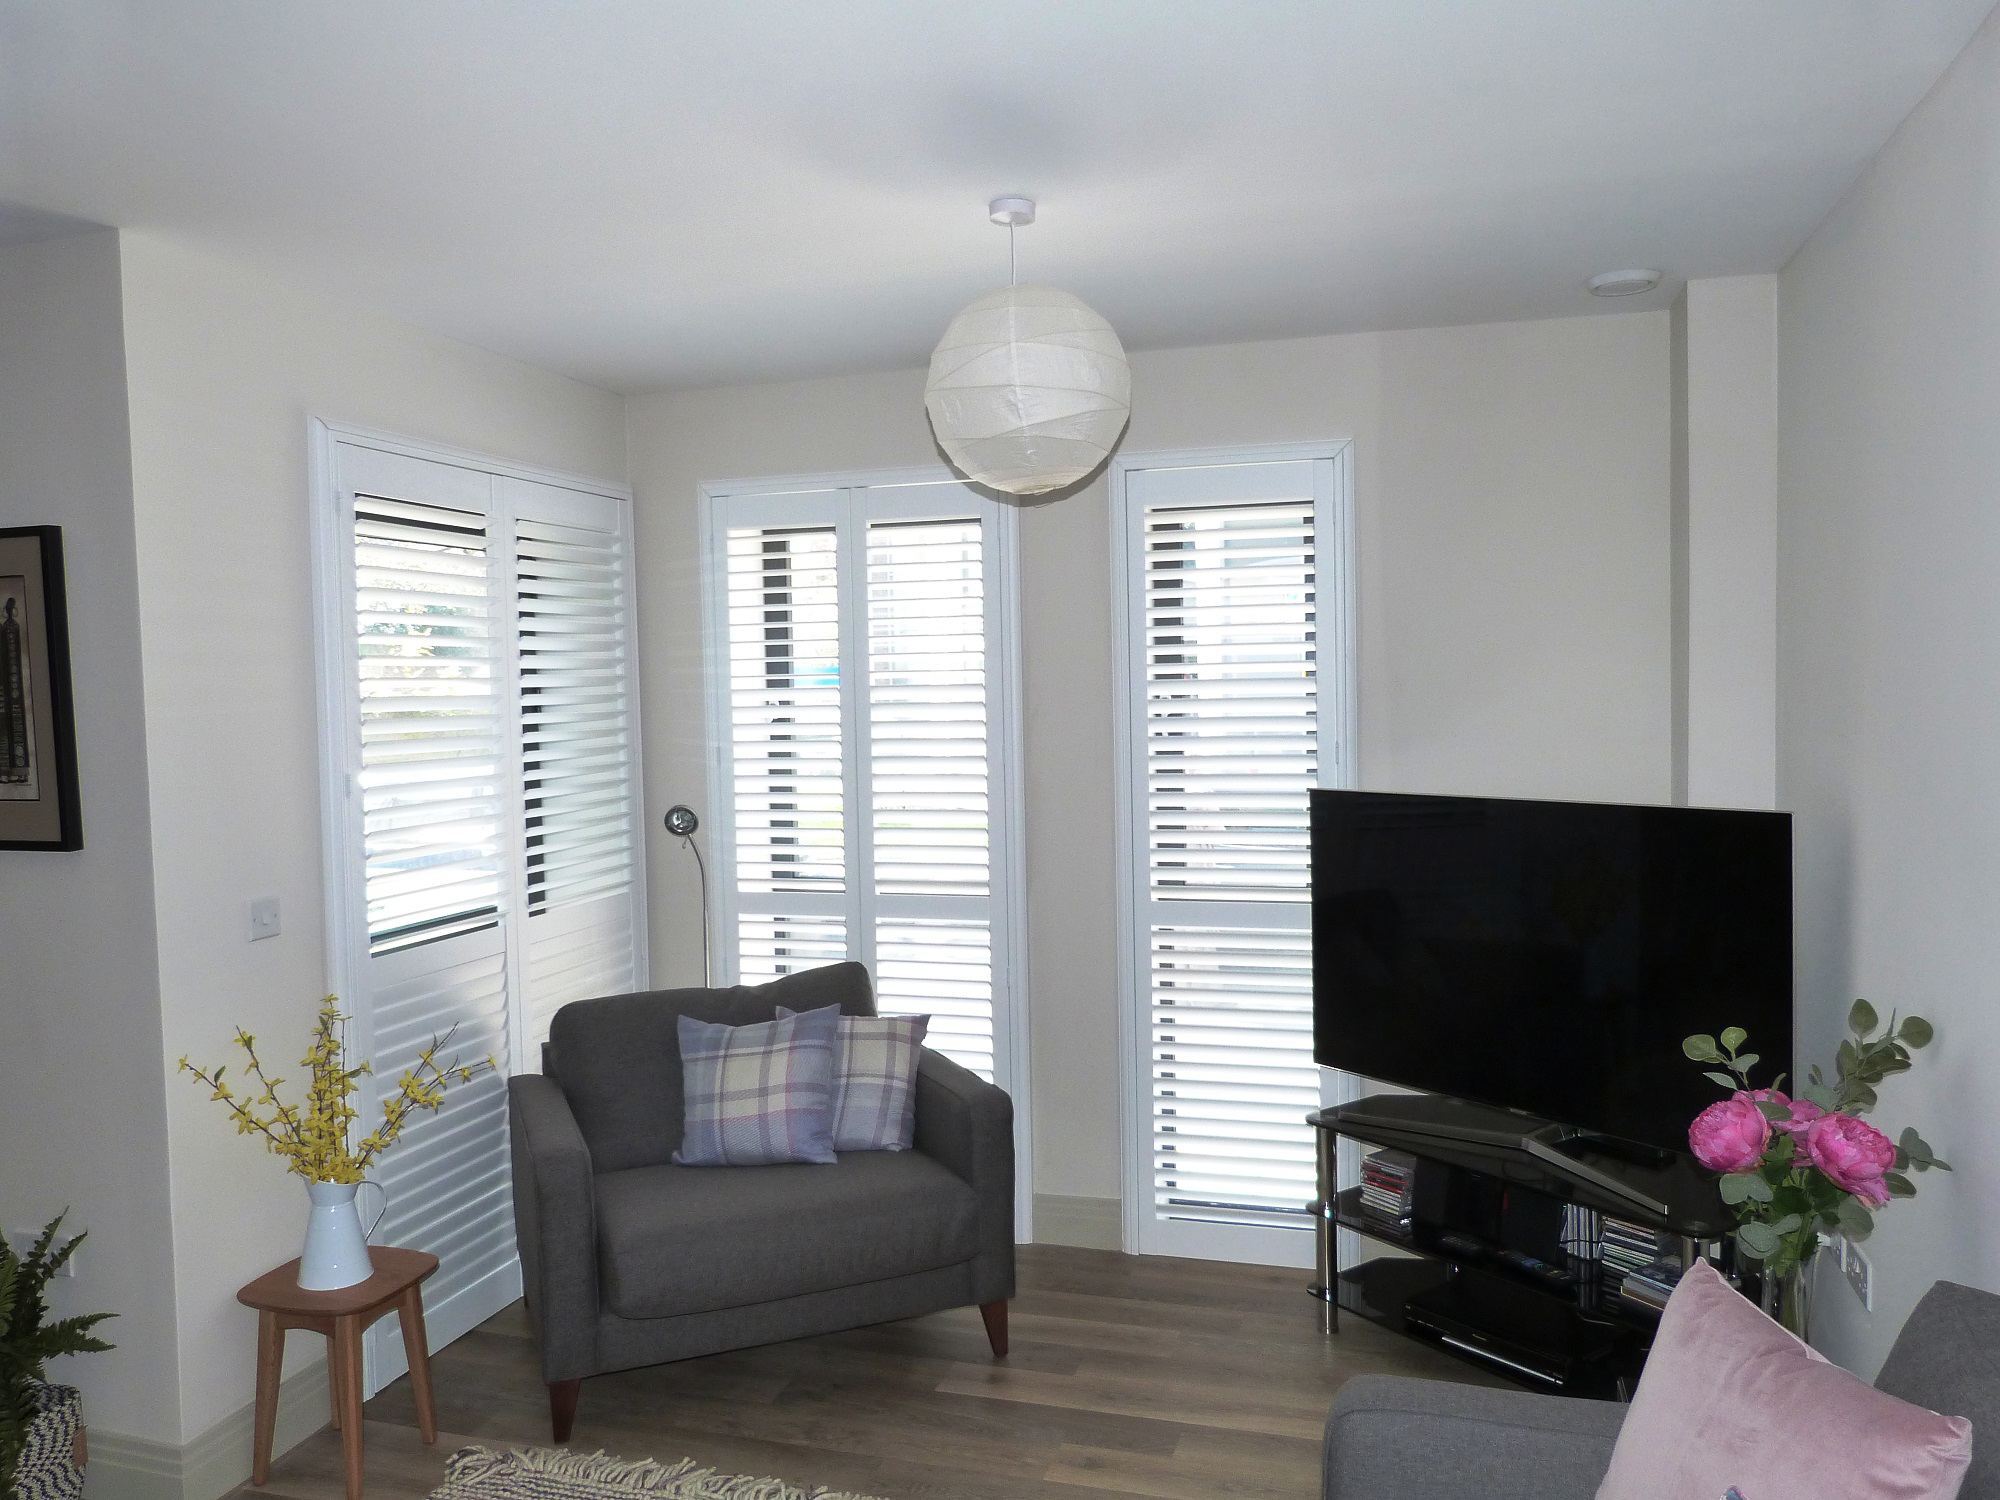 Richards Blinds of Chichester offer an extensive range of shutters which are installed by trained craftsmen